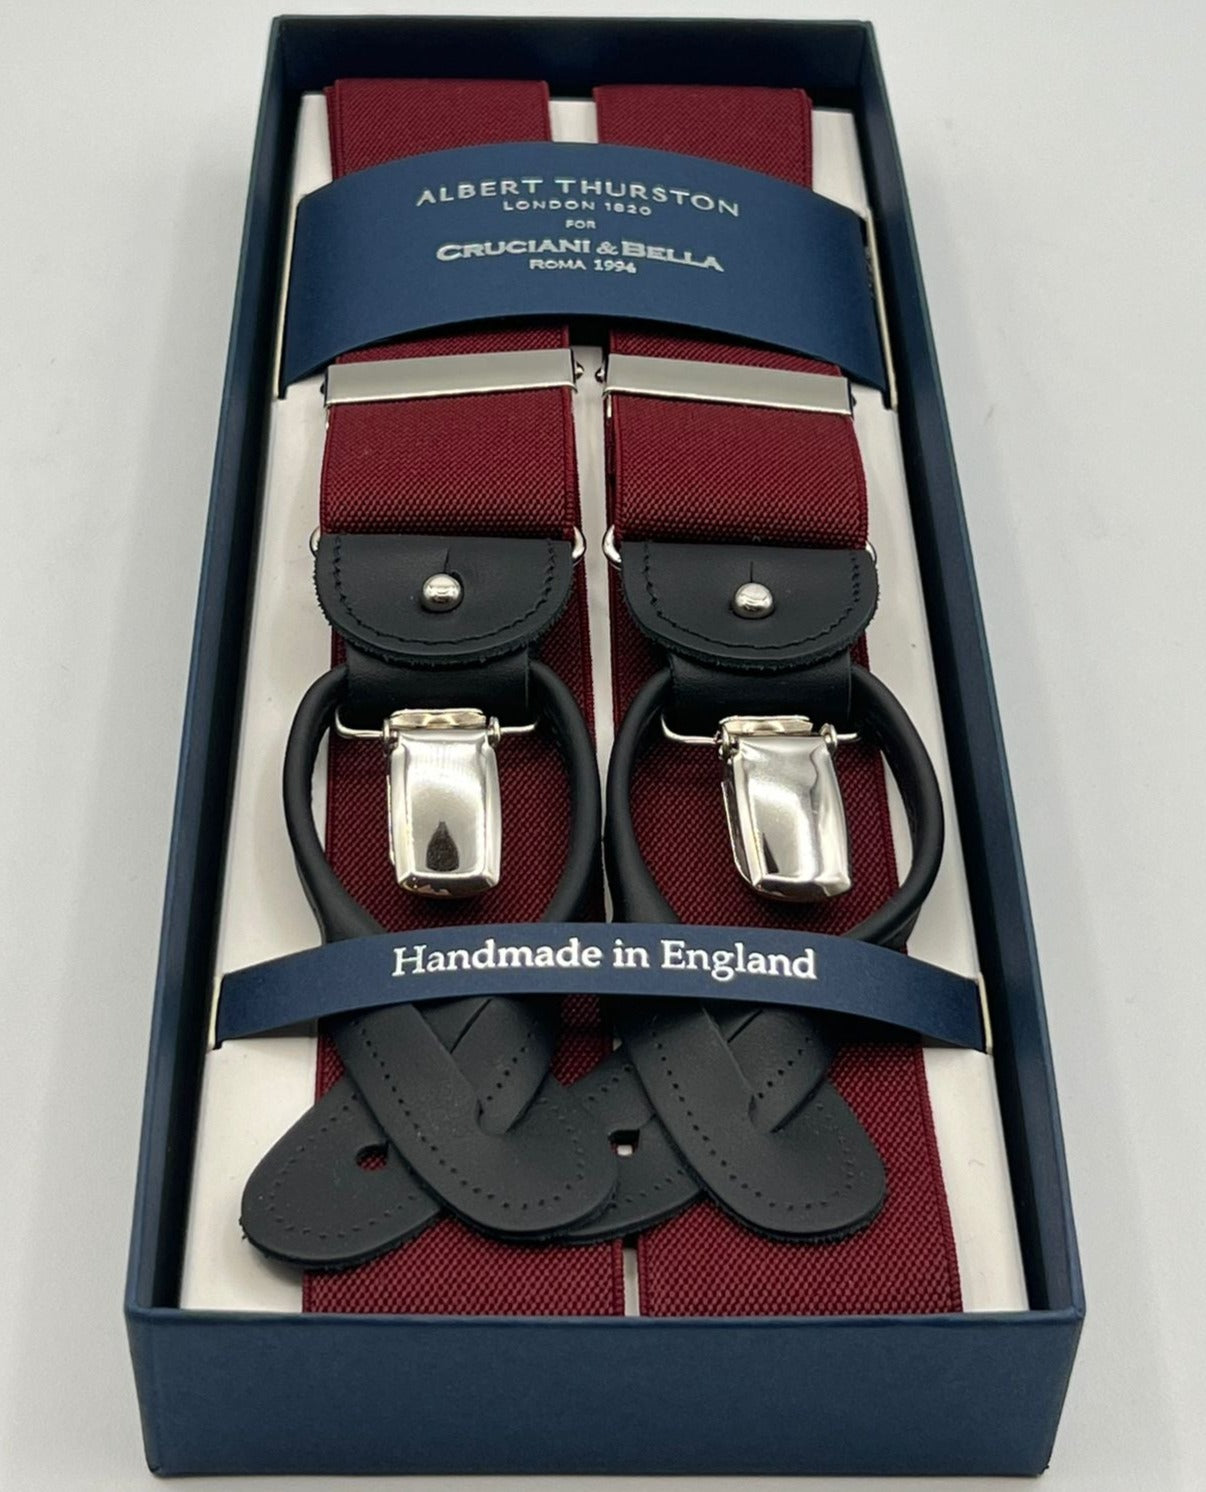 Albert Thurston for Cruciani & Bella Made in England 2 in 1 Adjustable Sizing 35 mm elastic braces Red Wine Plain Y-Shaped Nickel Fittings Size MULTIFIT